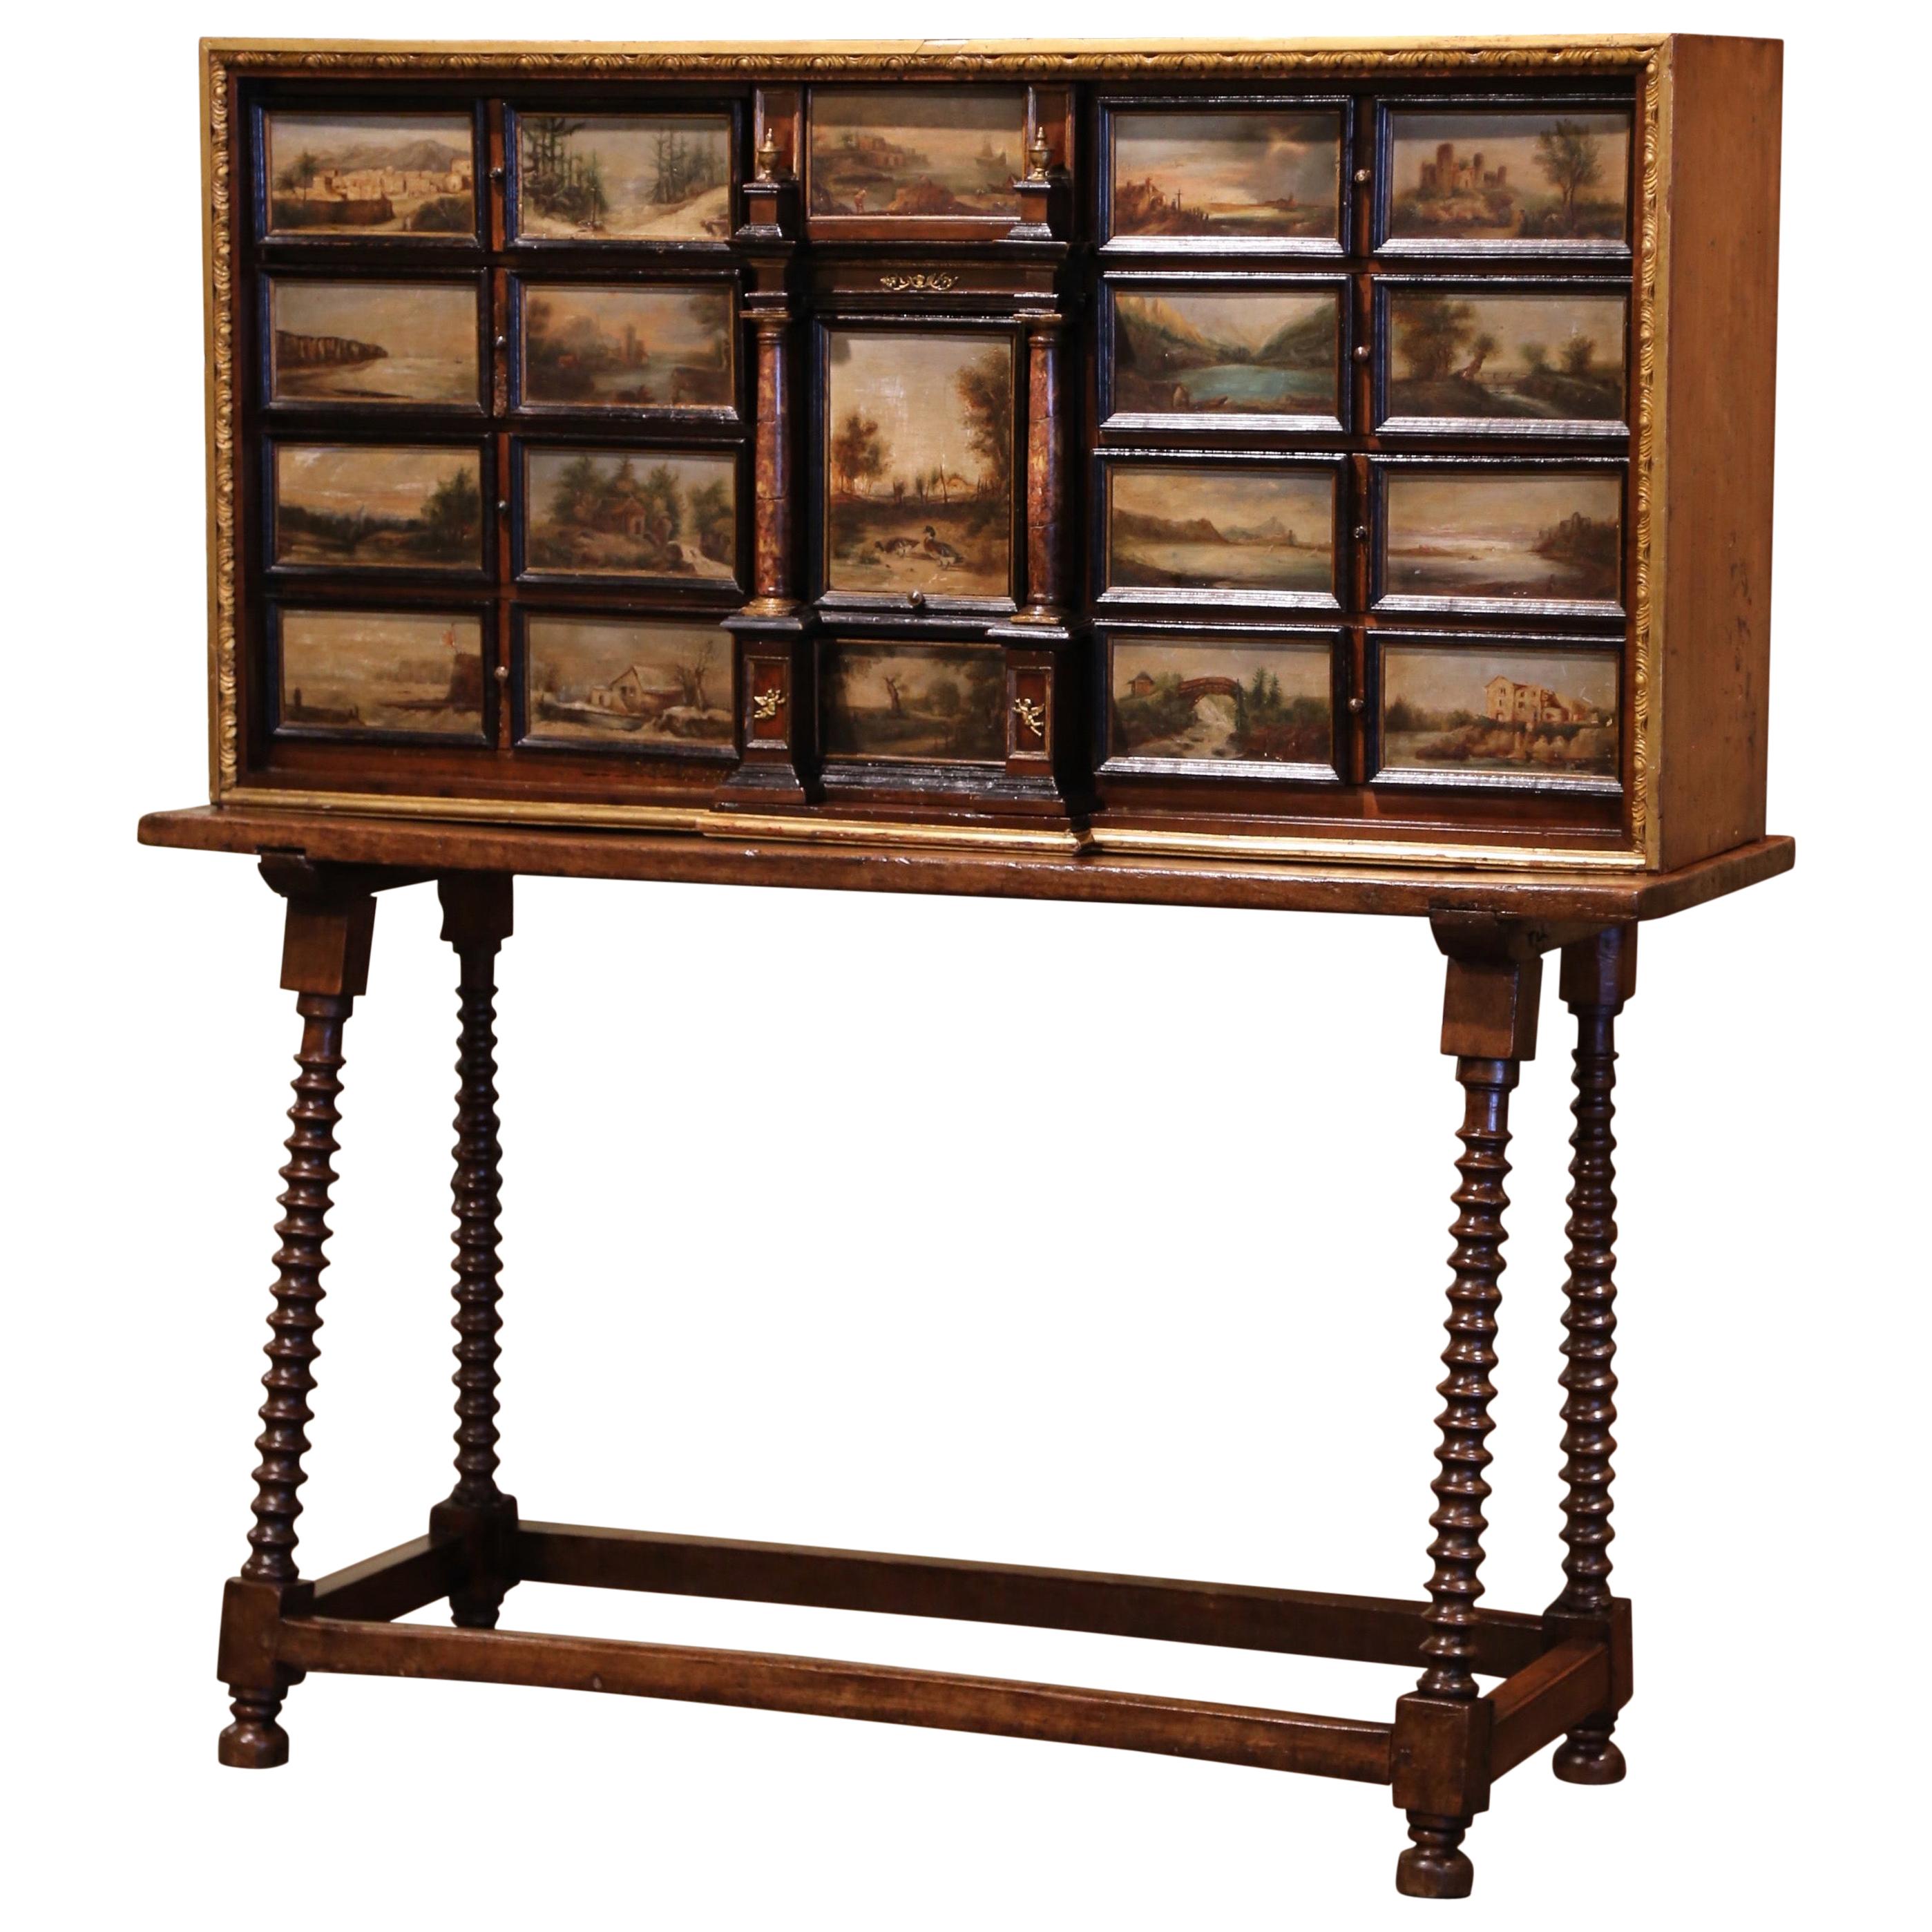 19th Century Spanish Walnut Bargueño on Stand with Hand Painted Landscape Scenes